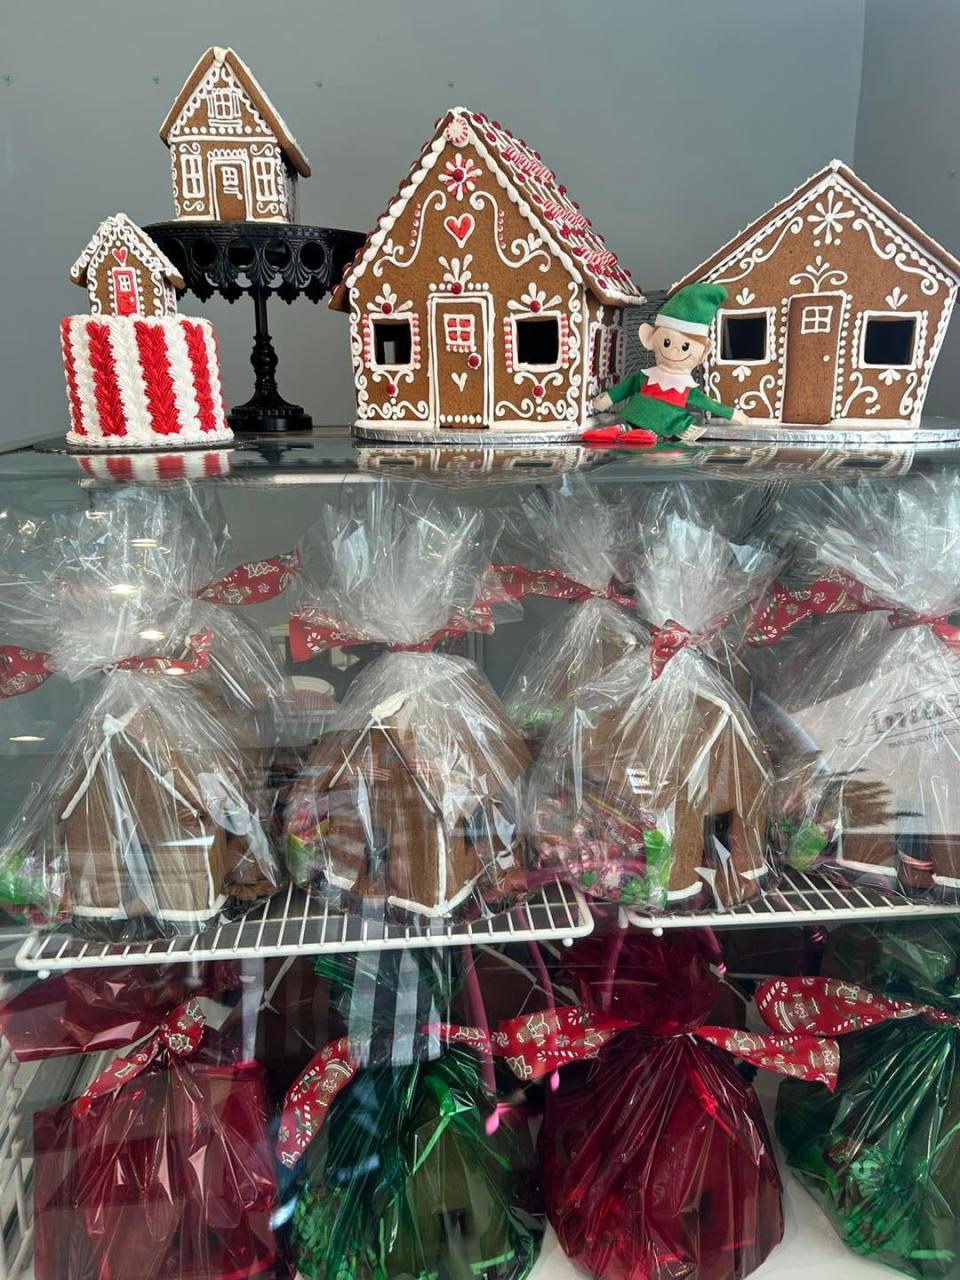 Gingerbread house kits from Amazing Cakes, 54 Main St., Lakeville.